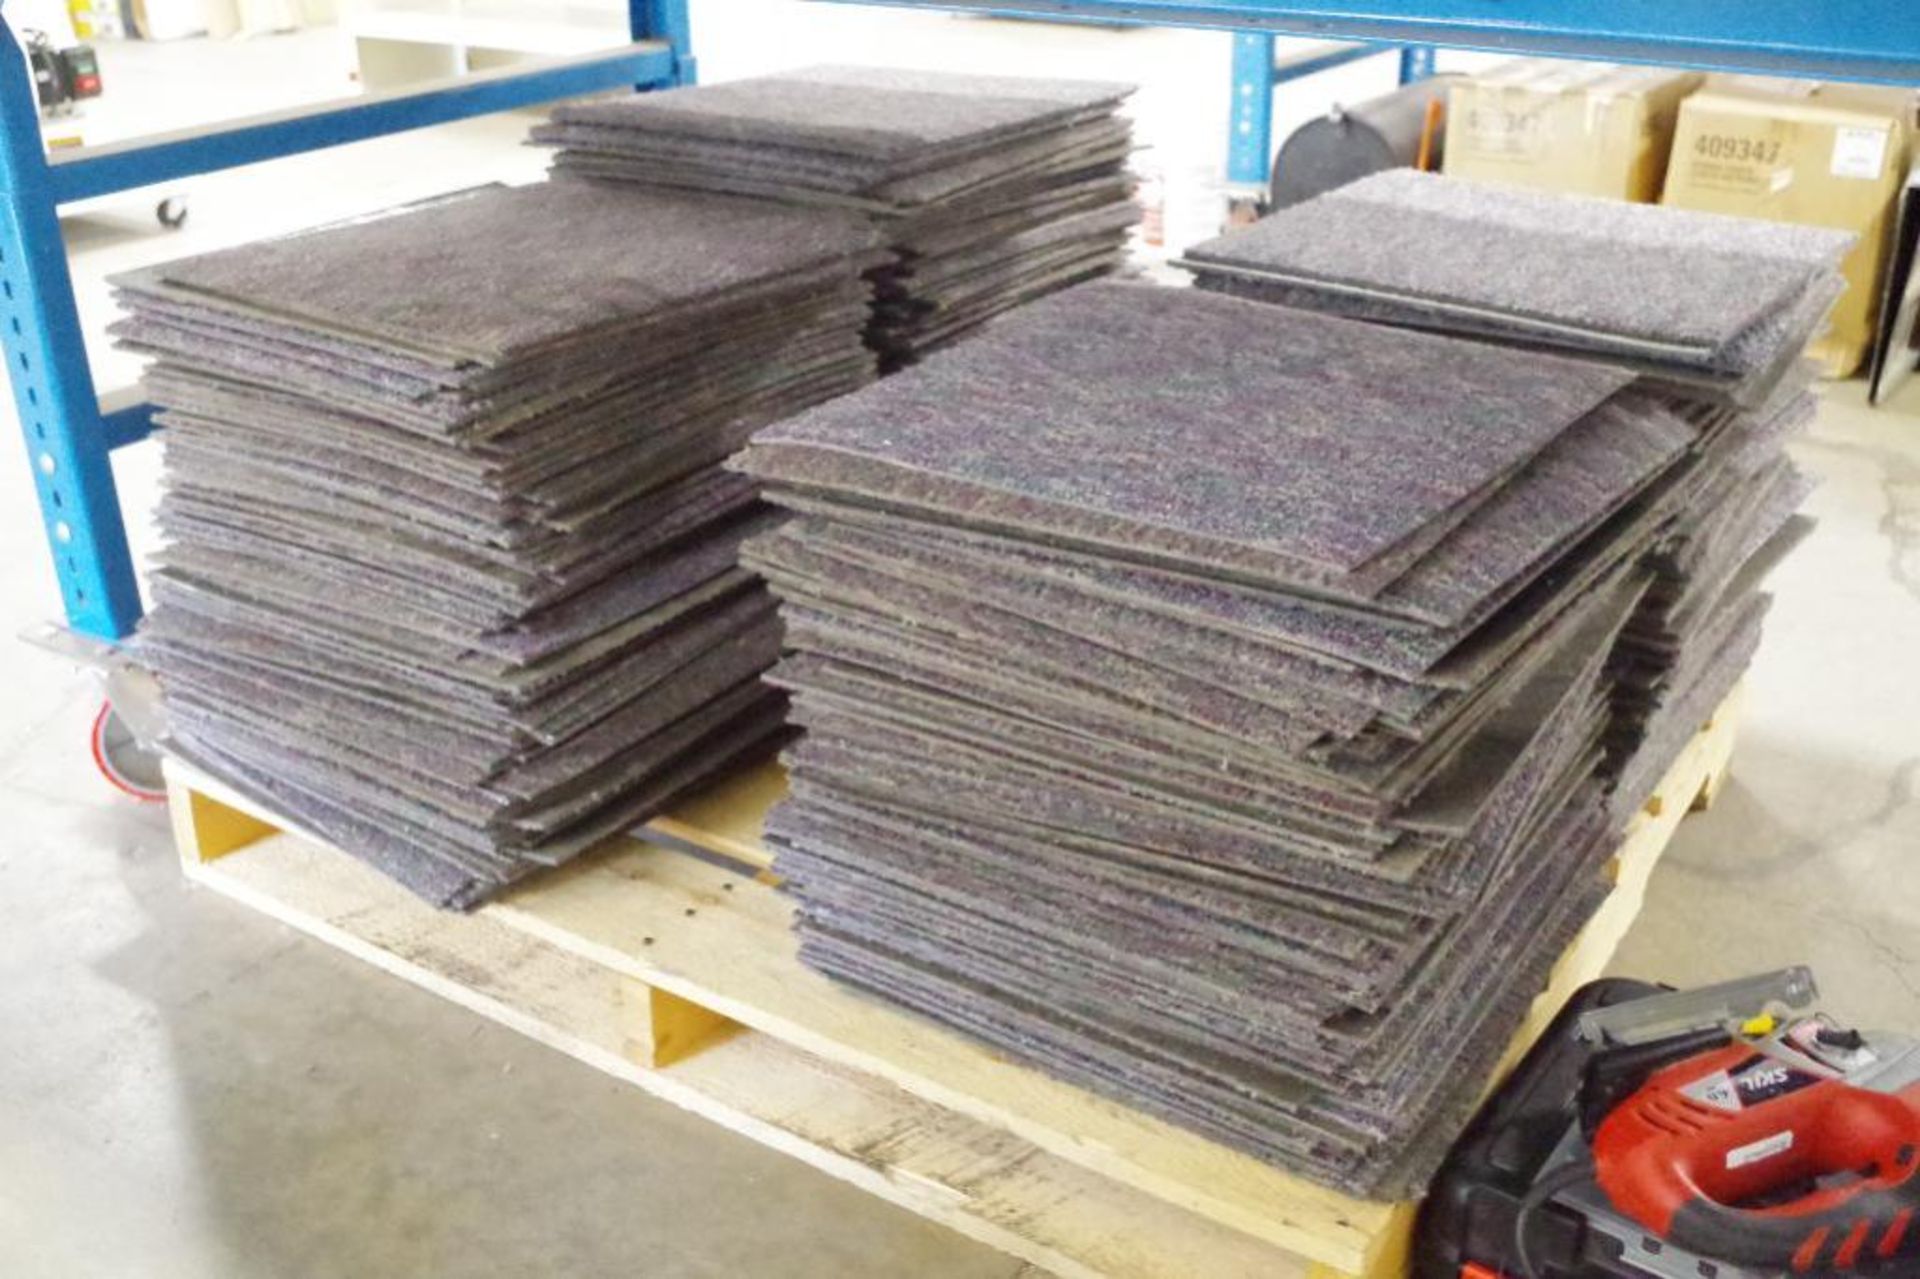 [380+/-] 18"x18" Carpet Squares, Charcoal/Greyish Color, Appear Previously Used/Installed